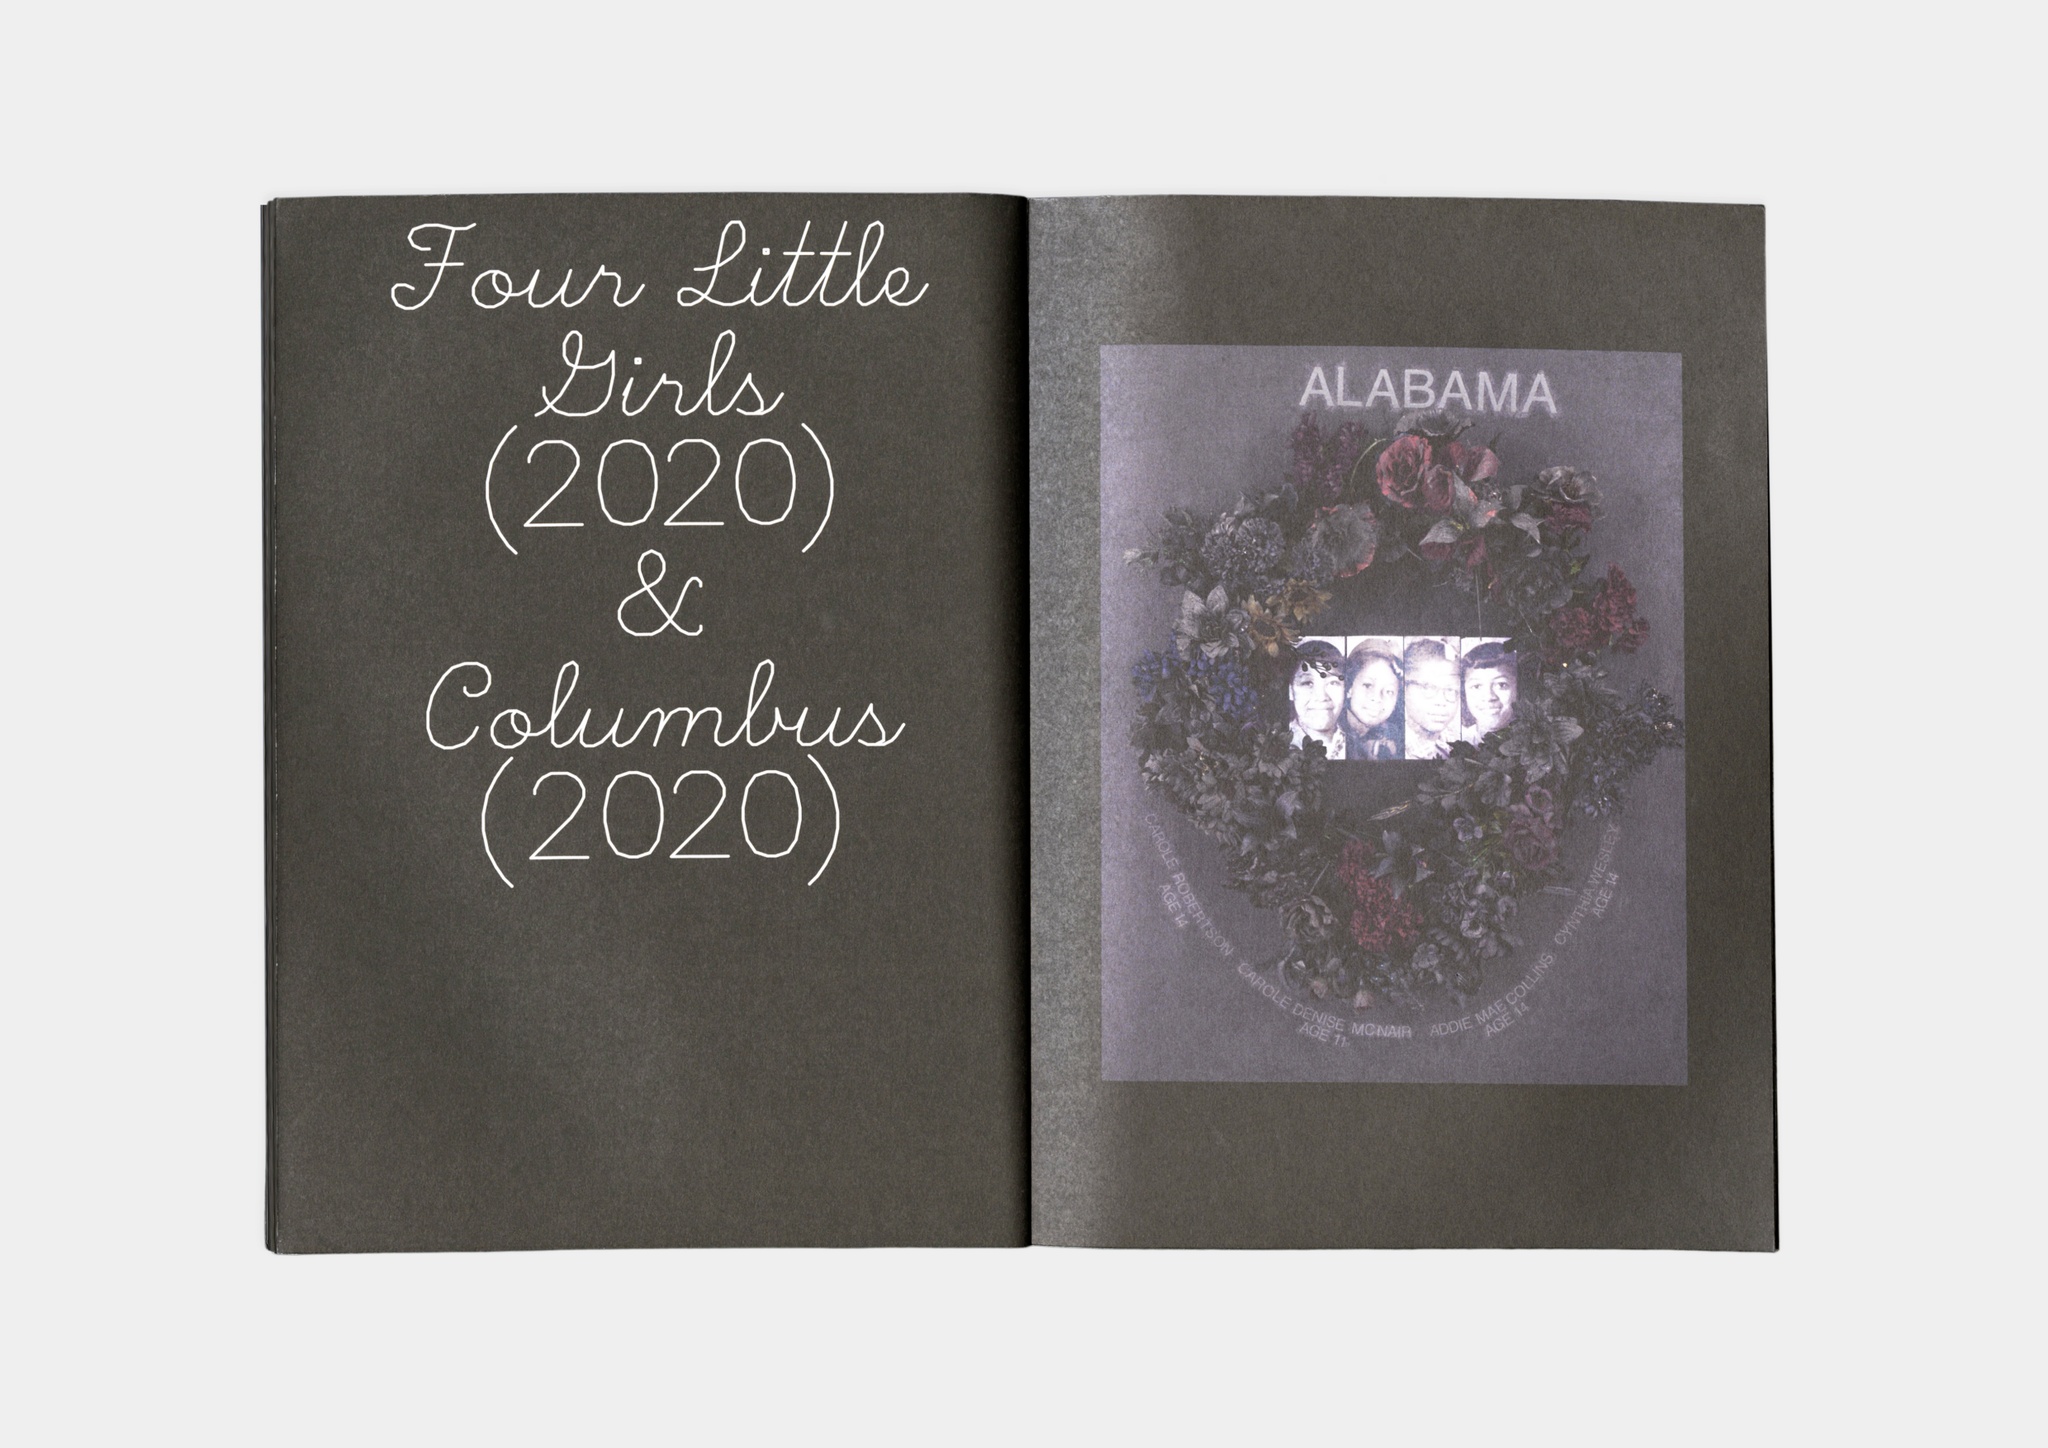 A spread of the catalogue "Howardena Pindell: Rope/Fire/Water" with black pages. On the left is text in script with the names of two artworks by Pindell. On the right is a detail image of one of those works, a close-up of a black funereal wreath around a row of photos of four little girls. 